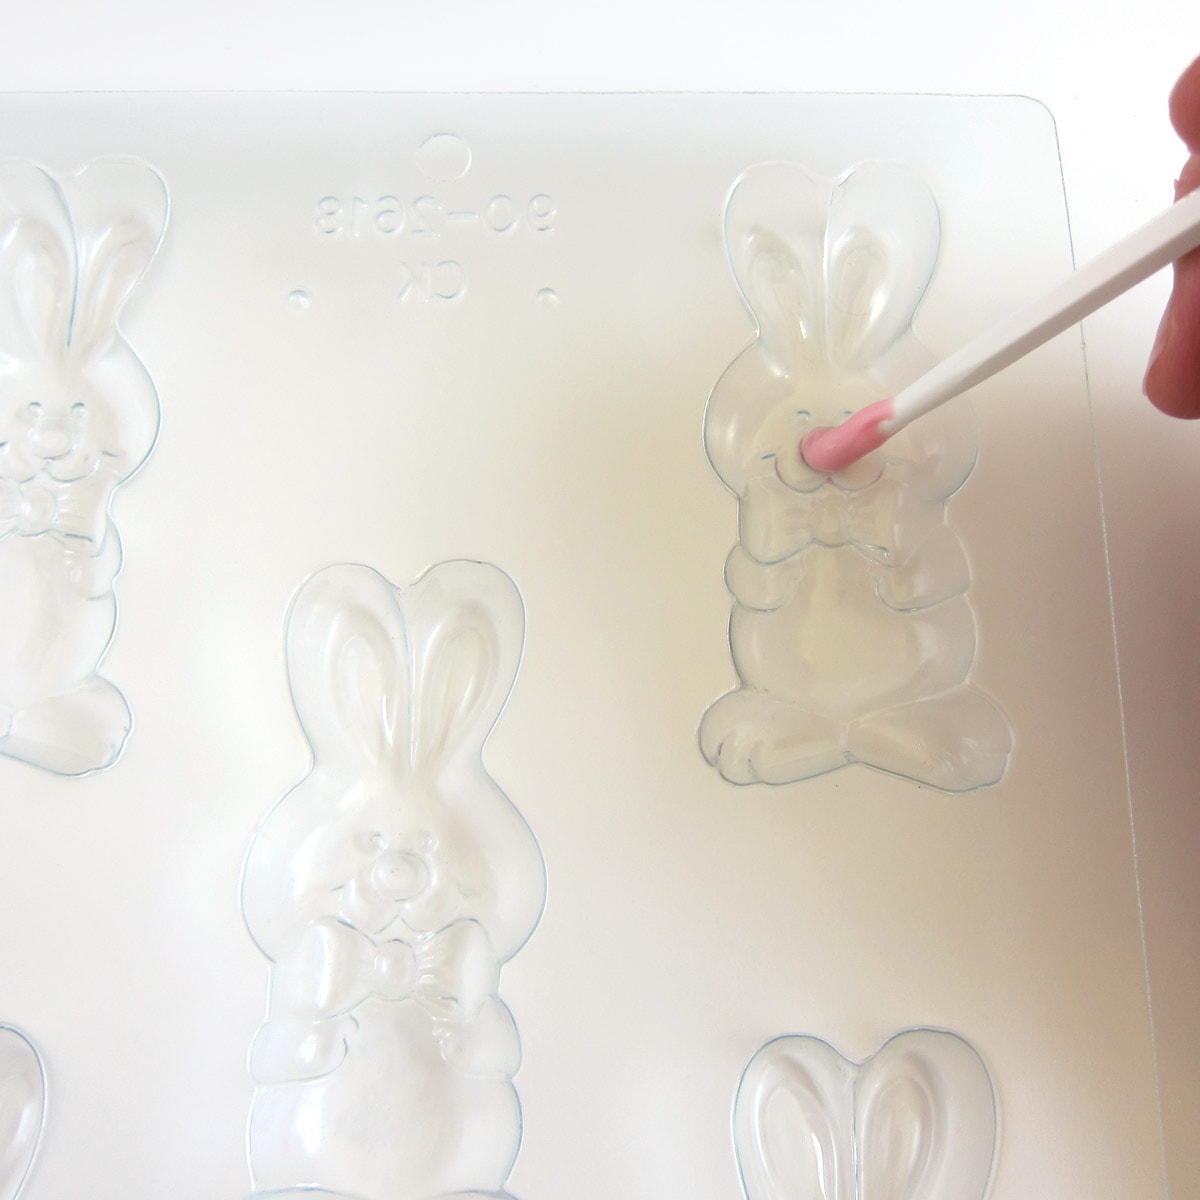 painting a pink nose in a bunny candy mold